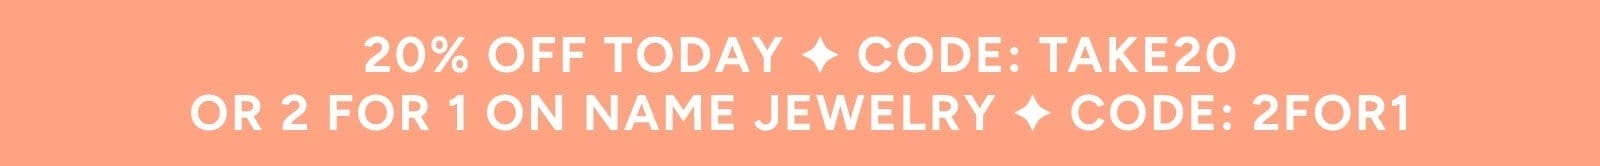 20% off today with code: TAKE20 or 2 for 1 on name jewelry with code: 2FOR1